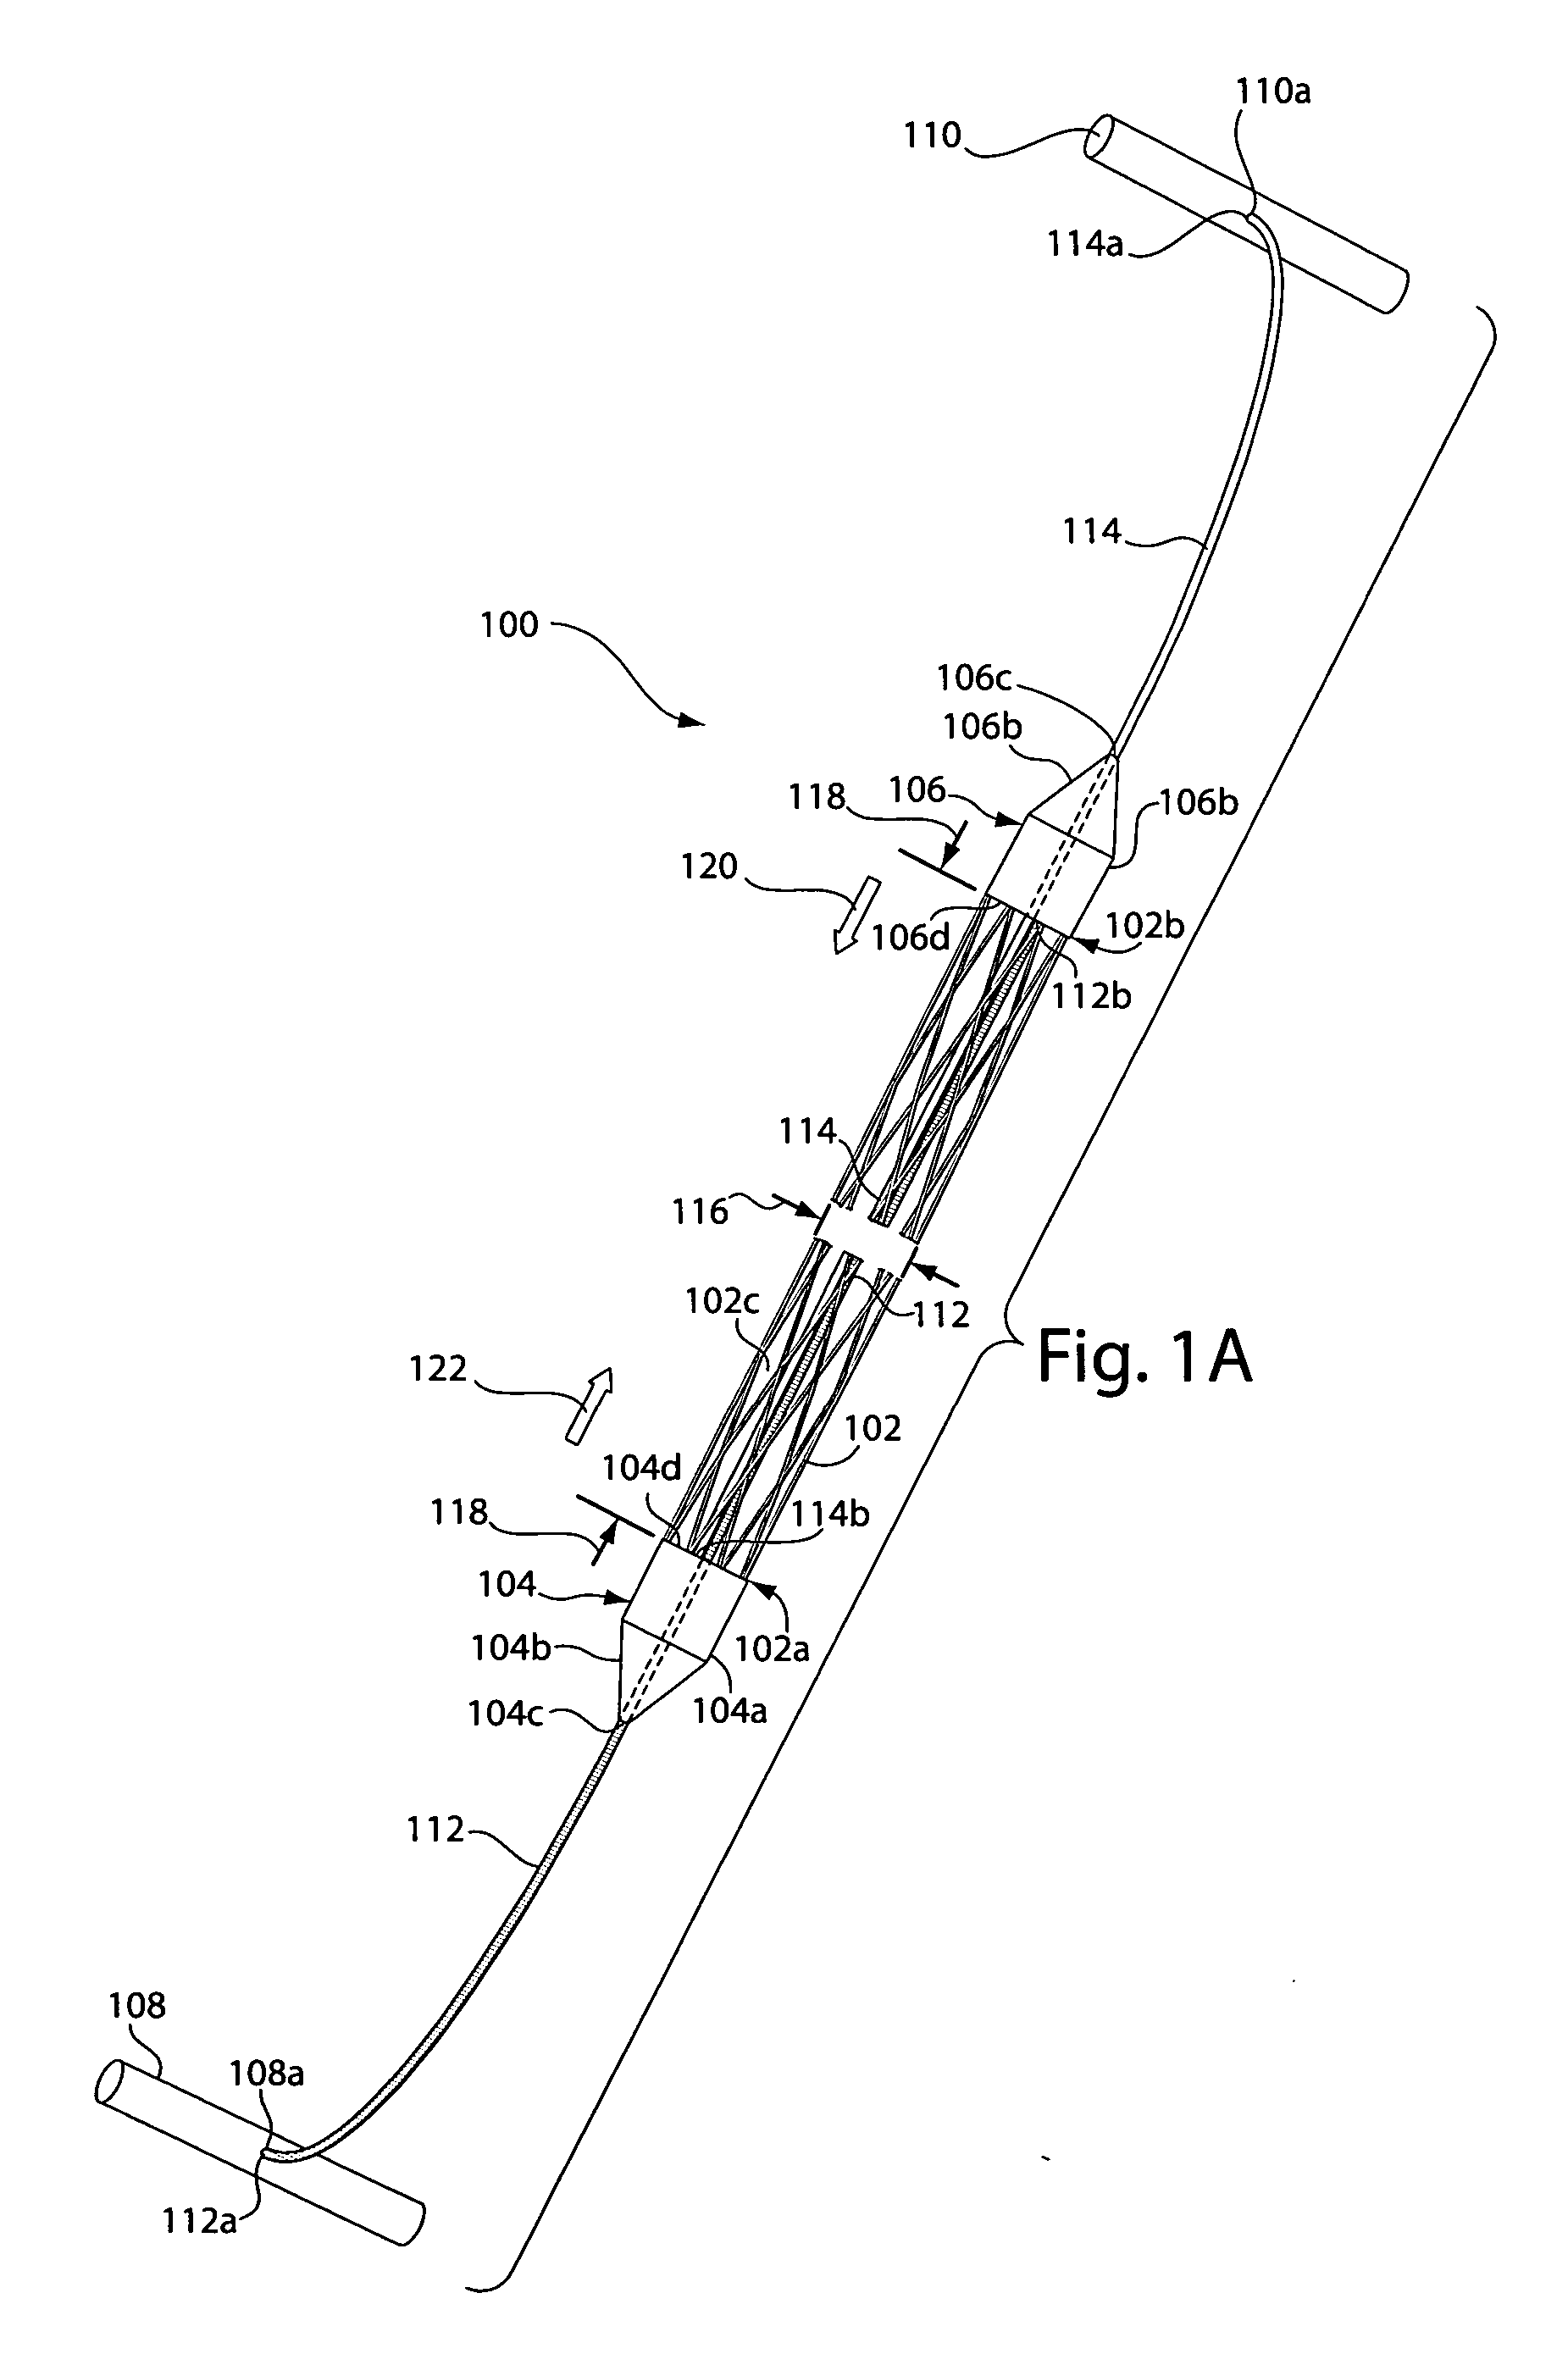 Tubular implantable sling and related delivery systems, methods and devices